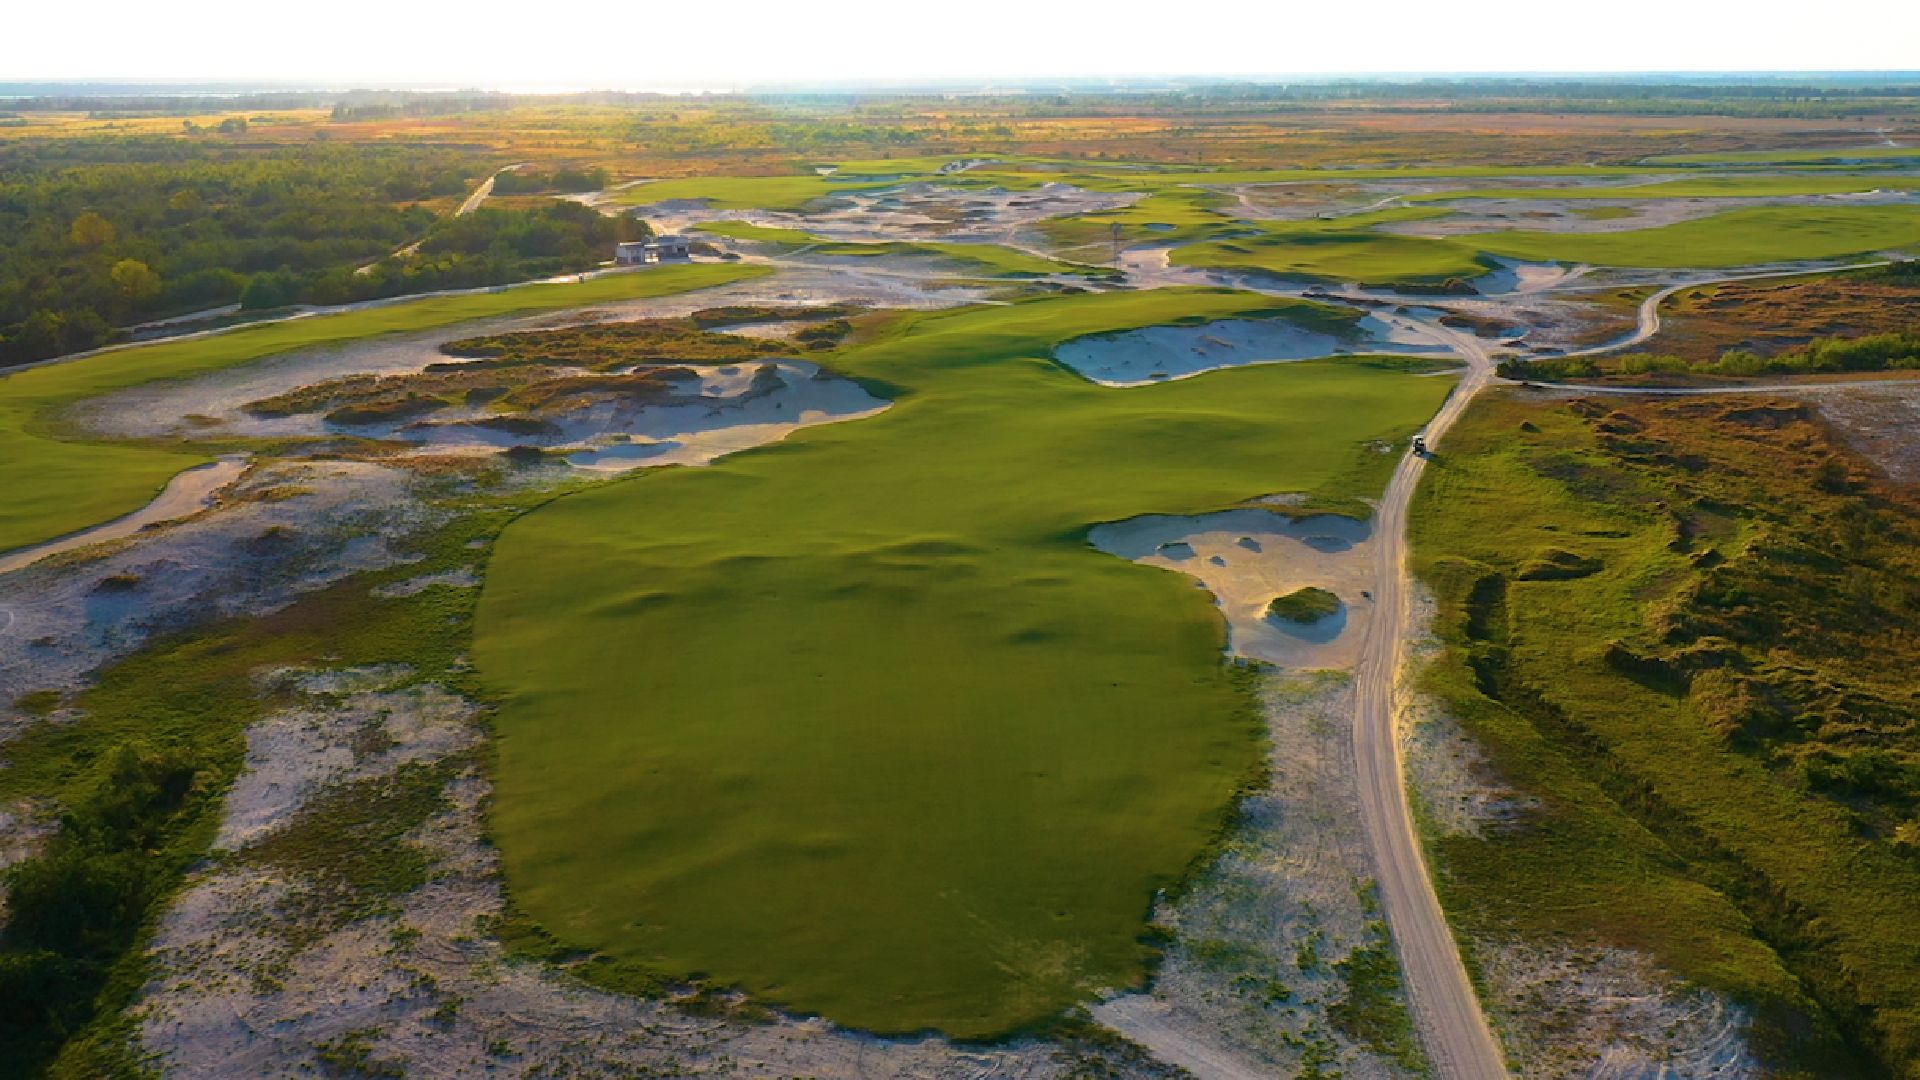 The Streamsong Challenge: 4 contestants, 3 sports, 1 champion | Carry On